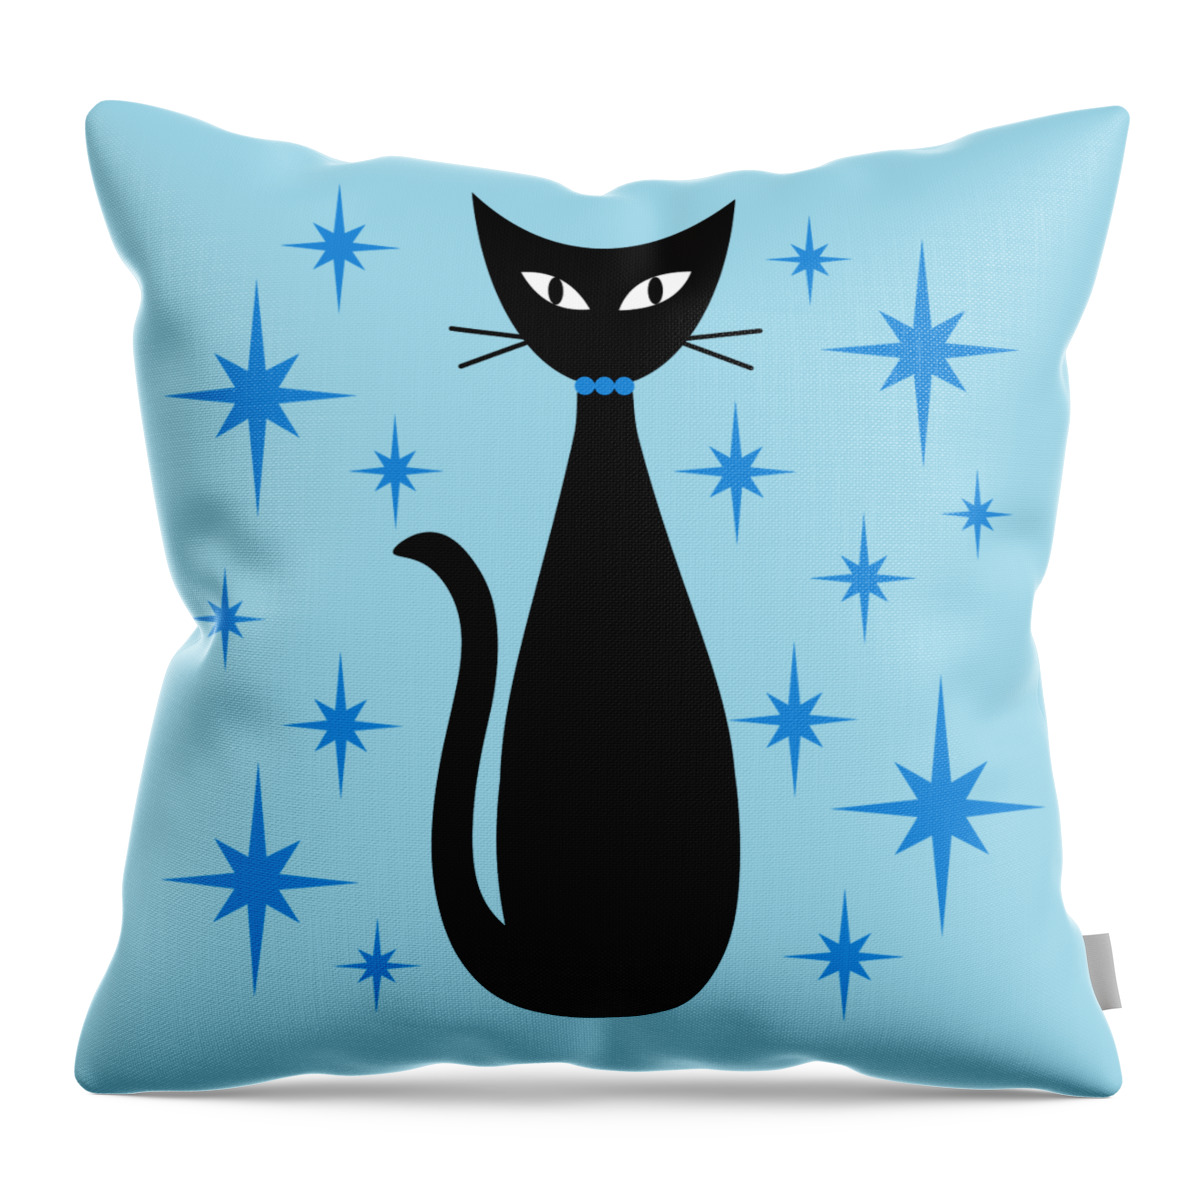 Mid Century Modern Throw Pillow featuring the digital art Mid Century Cat with Blue Starbursts by Donna Mibus